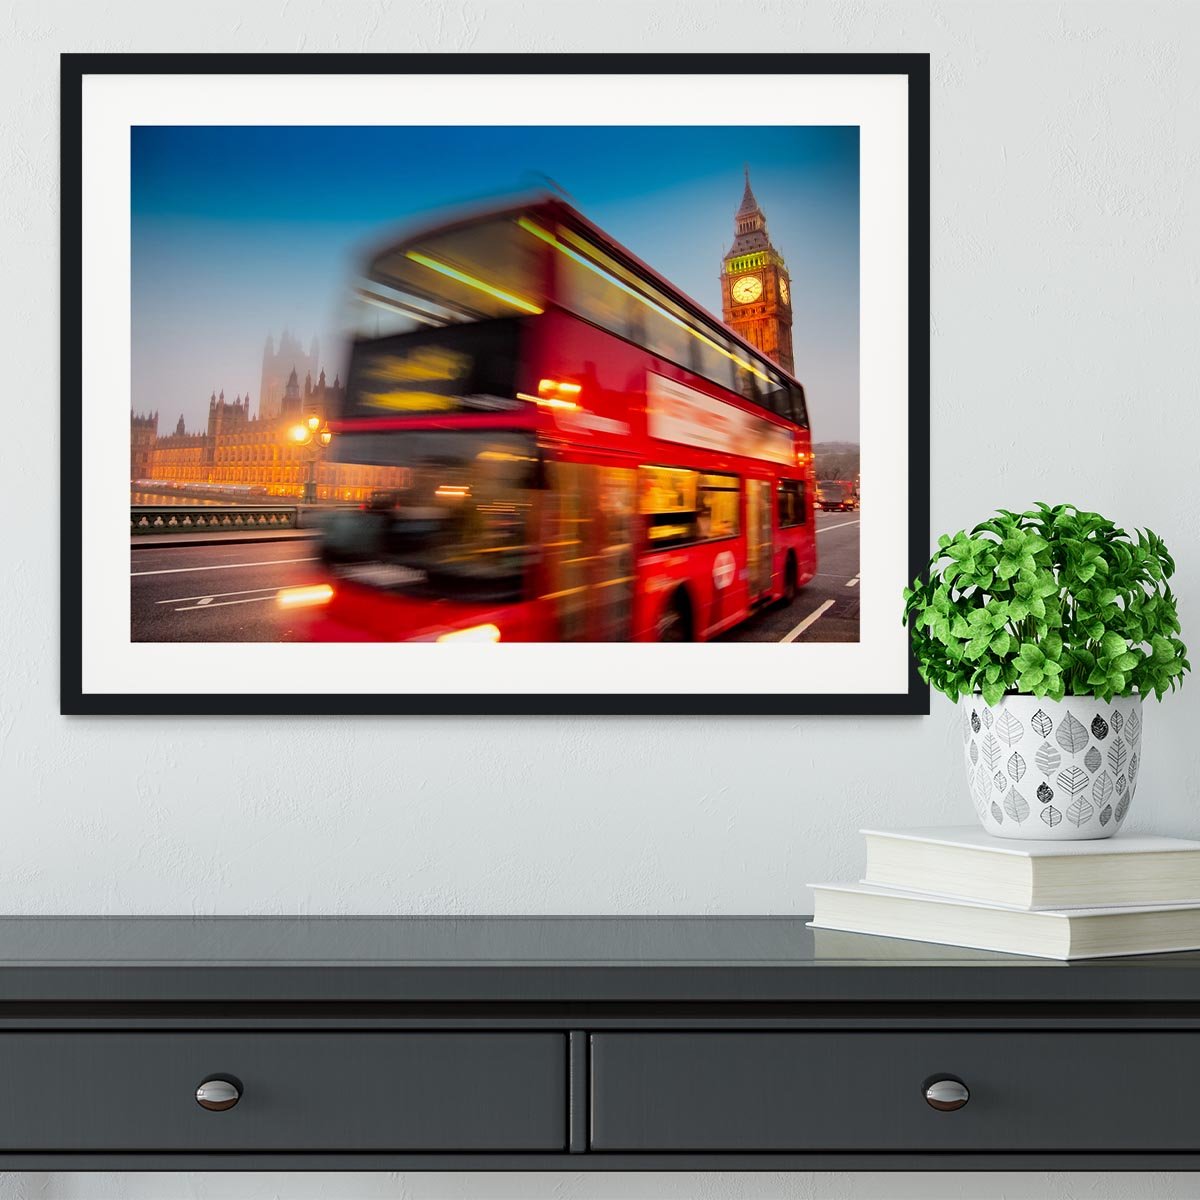 Houses Of Parliament red double-decker bus Framed Print - Canvas Art Rocks - 1